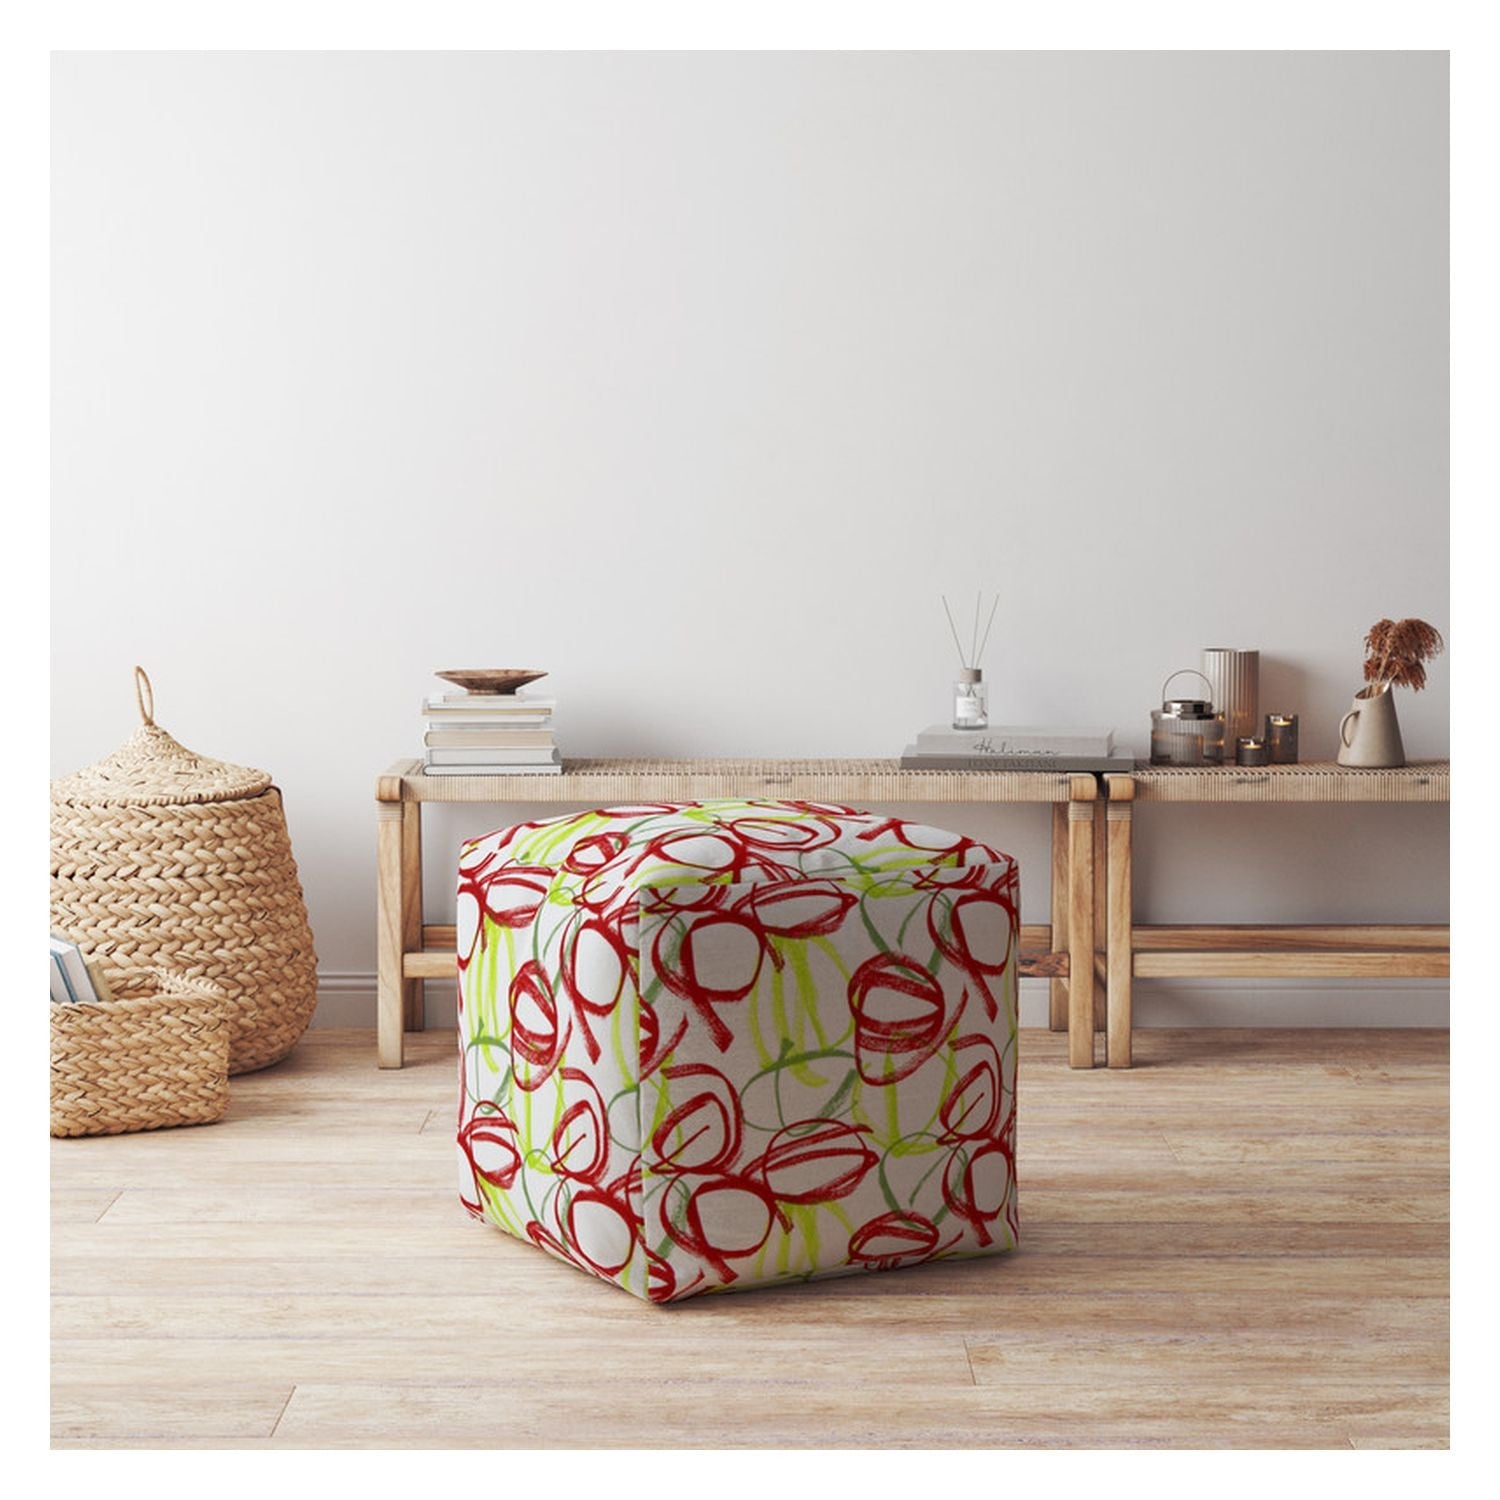 17" White Green And Red Cotton Abstract Pouf Ottoman